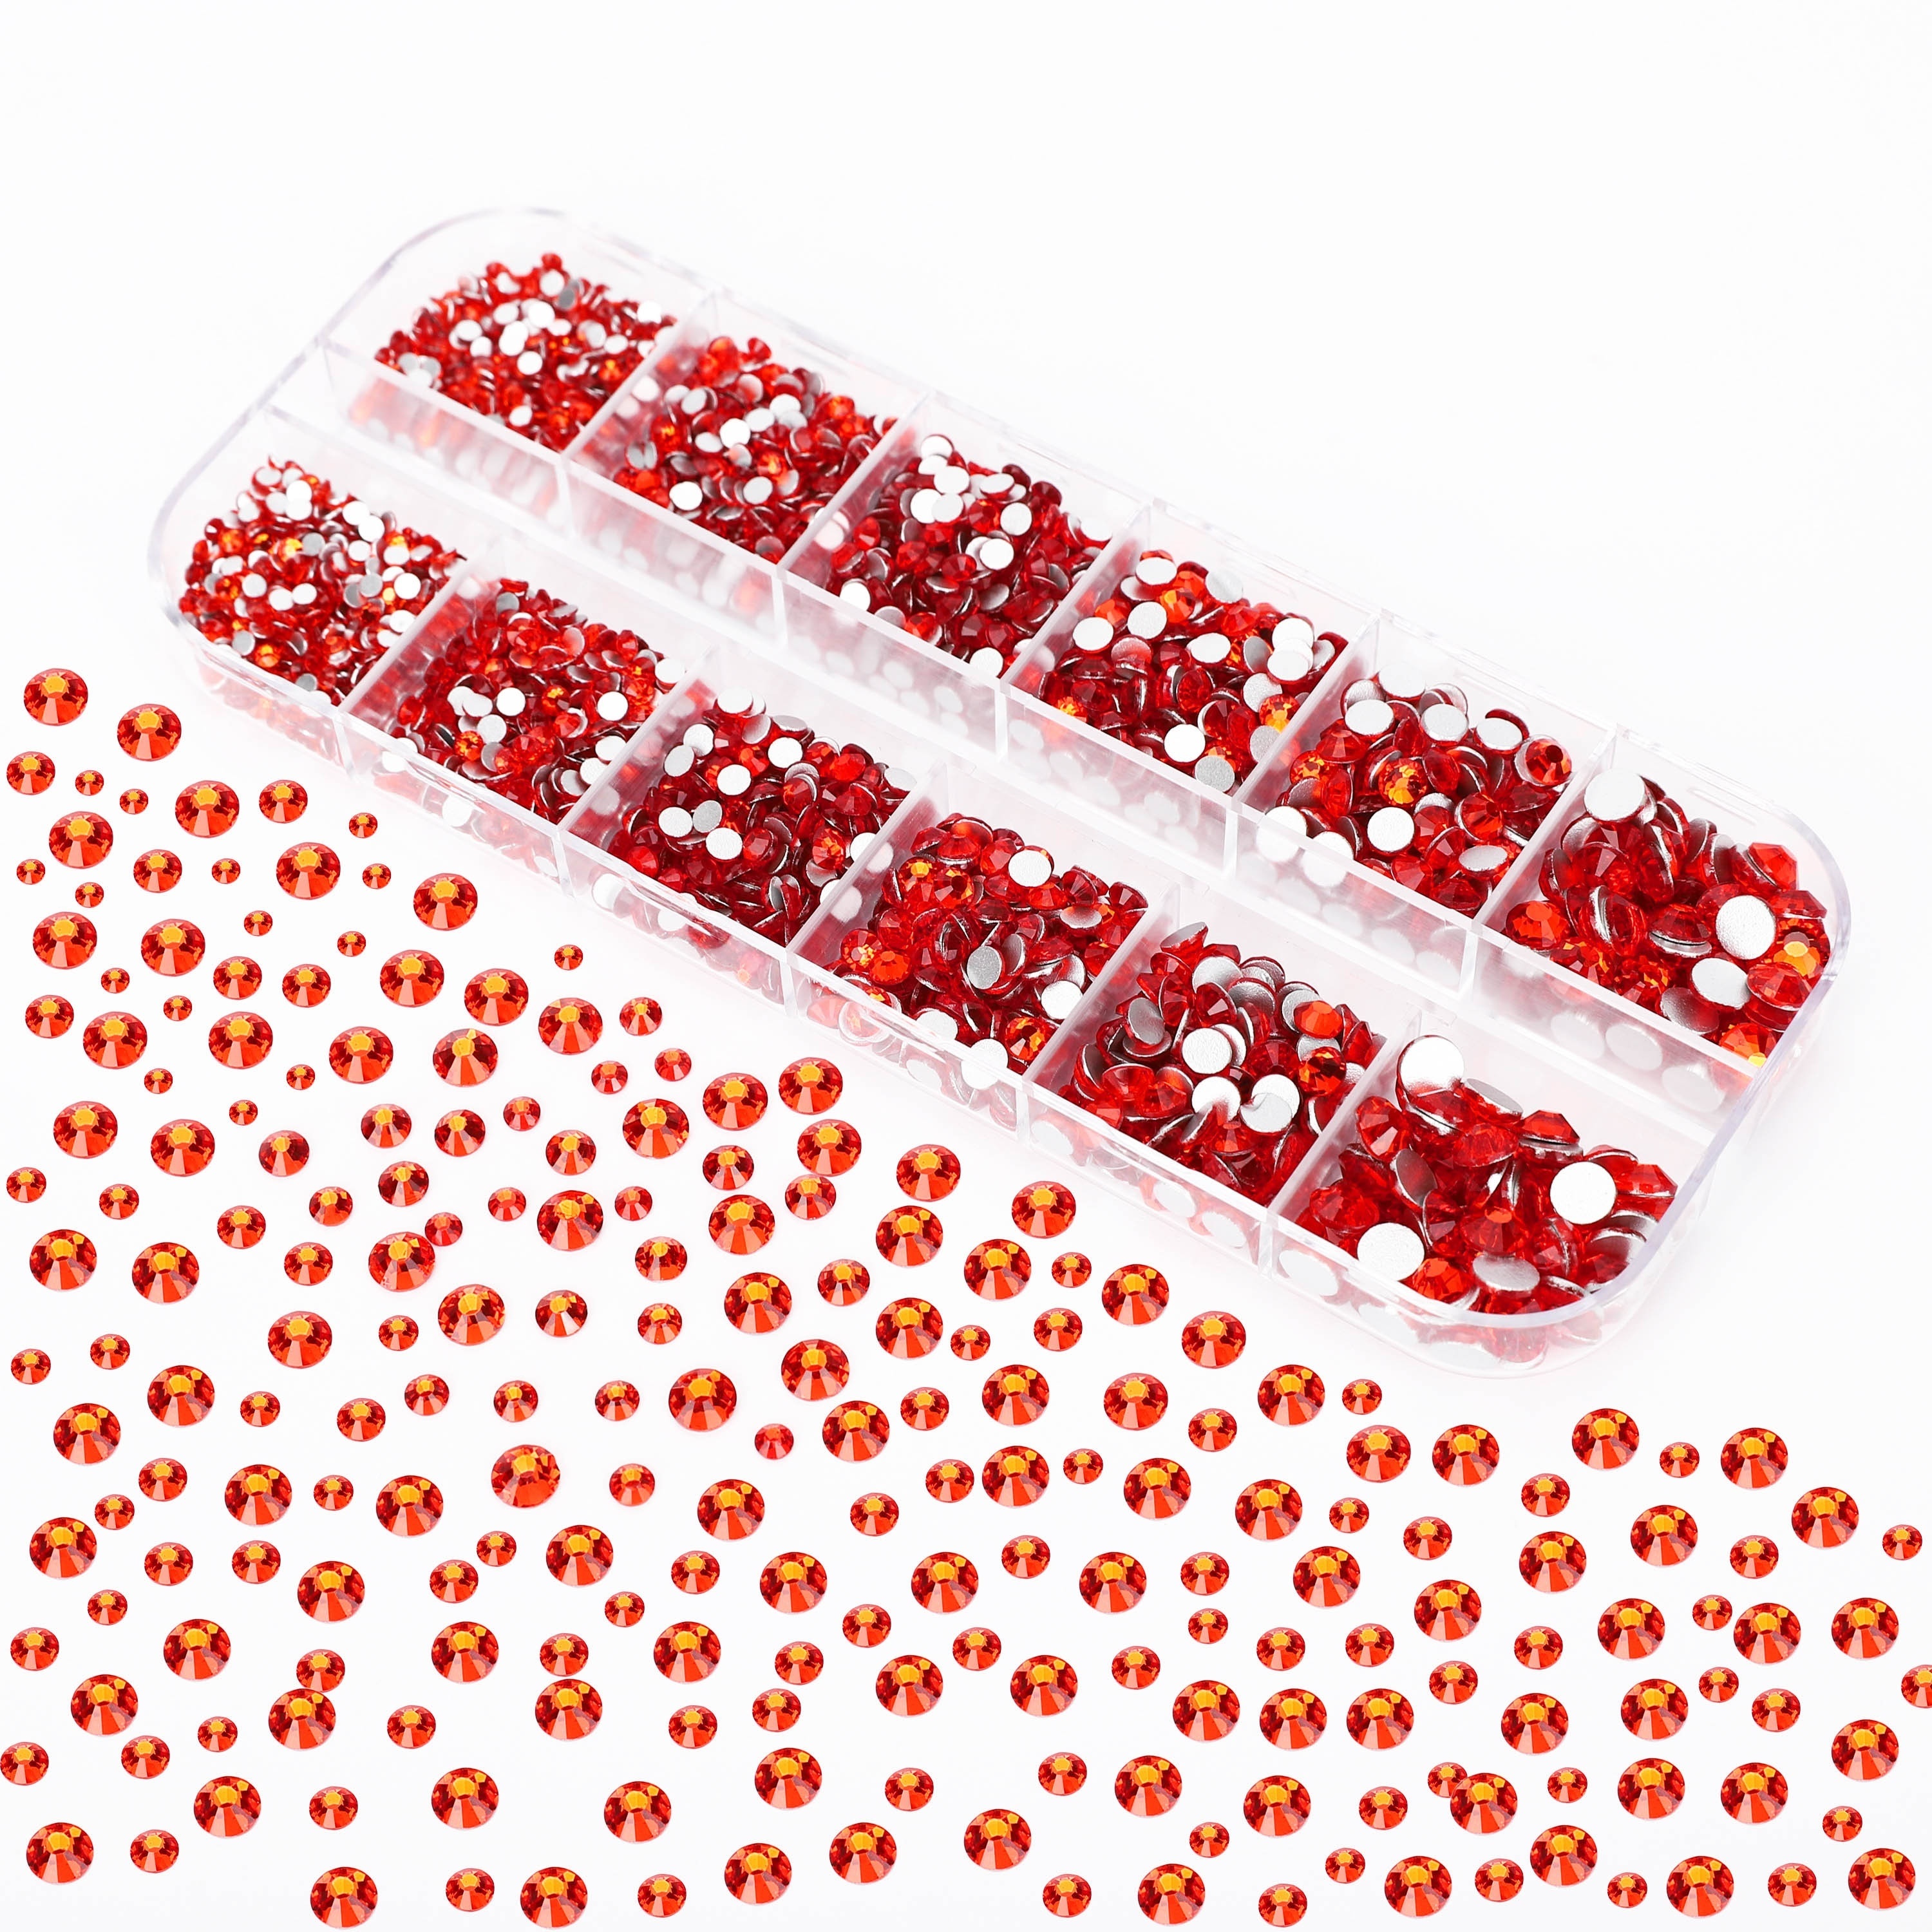 660Pcs Red Rhinestones Crystals Gems Nail Art Flat Back Round Multi Sized  Shapes Red Gems Rhinestone Stones Beads for Nail Art DIY Jewelry Crafts